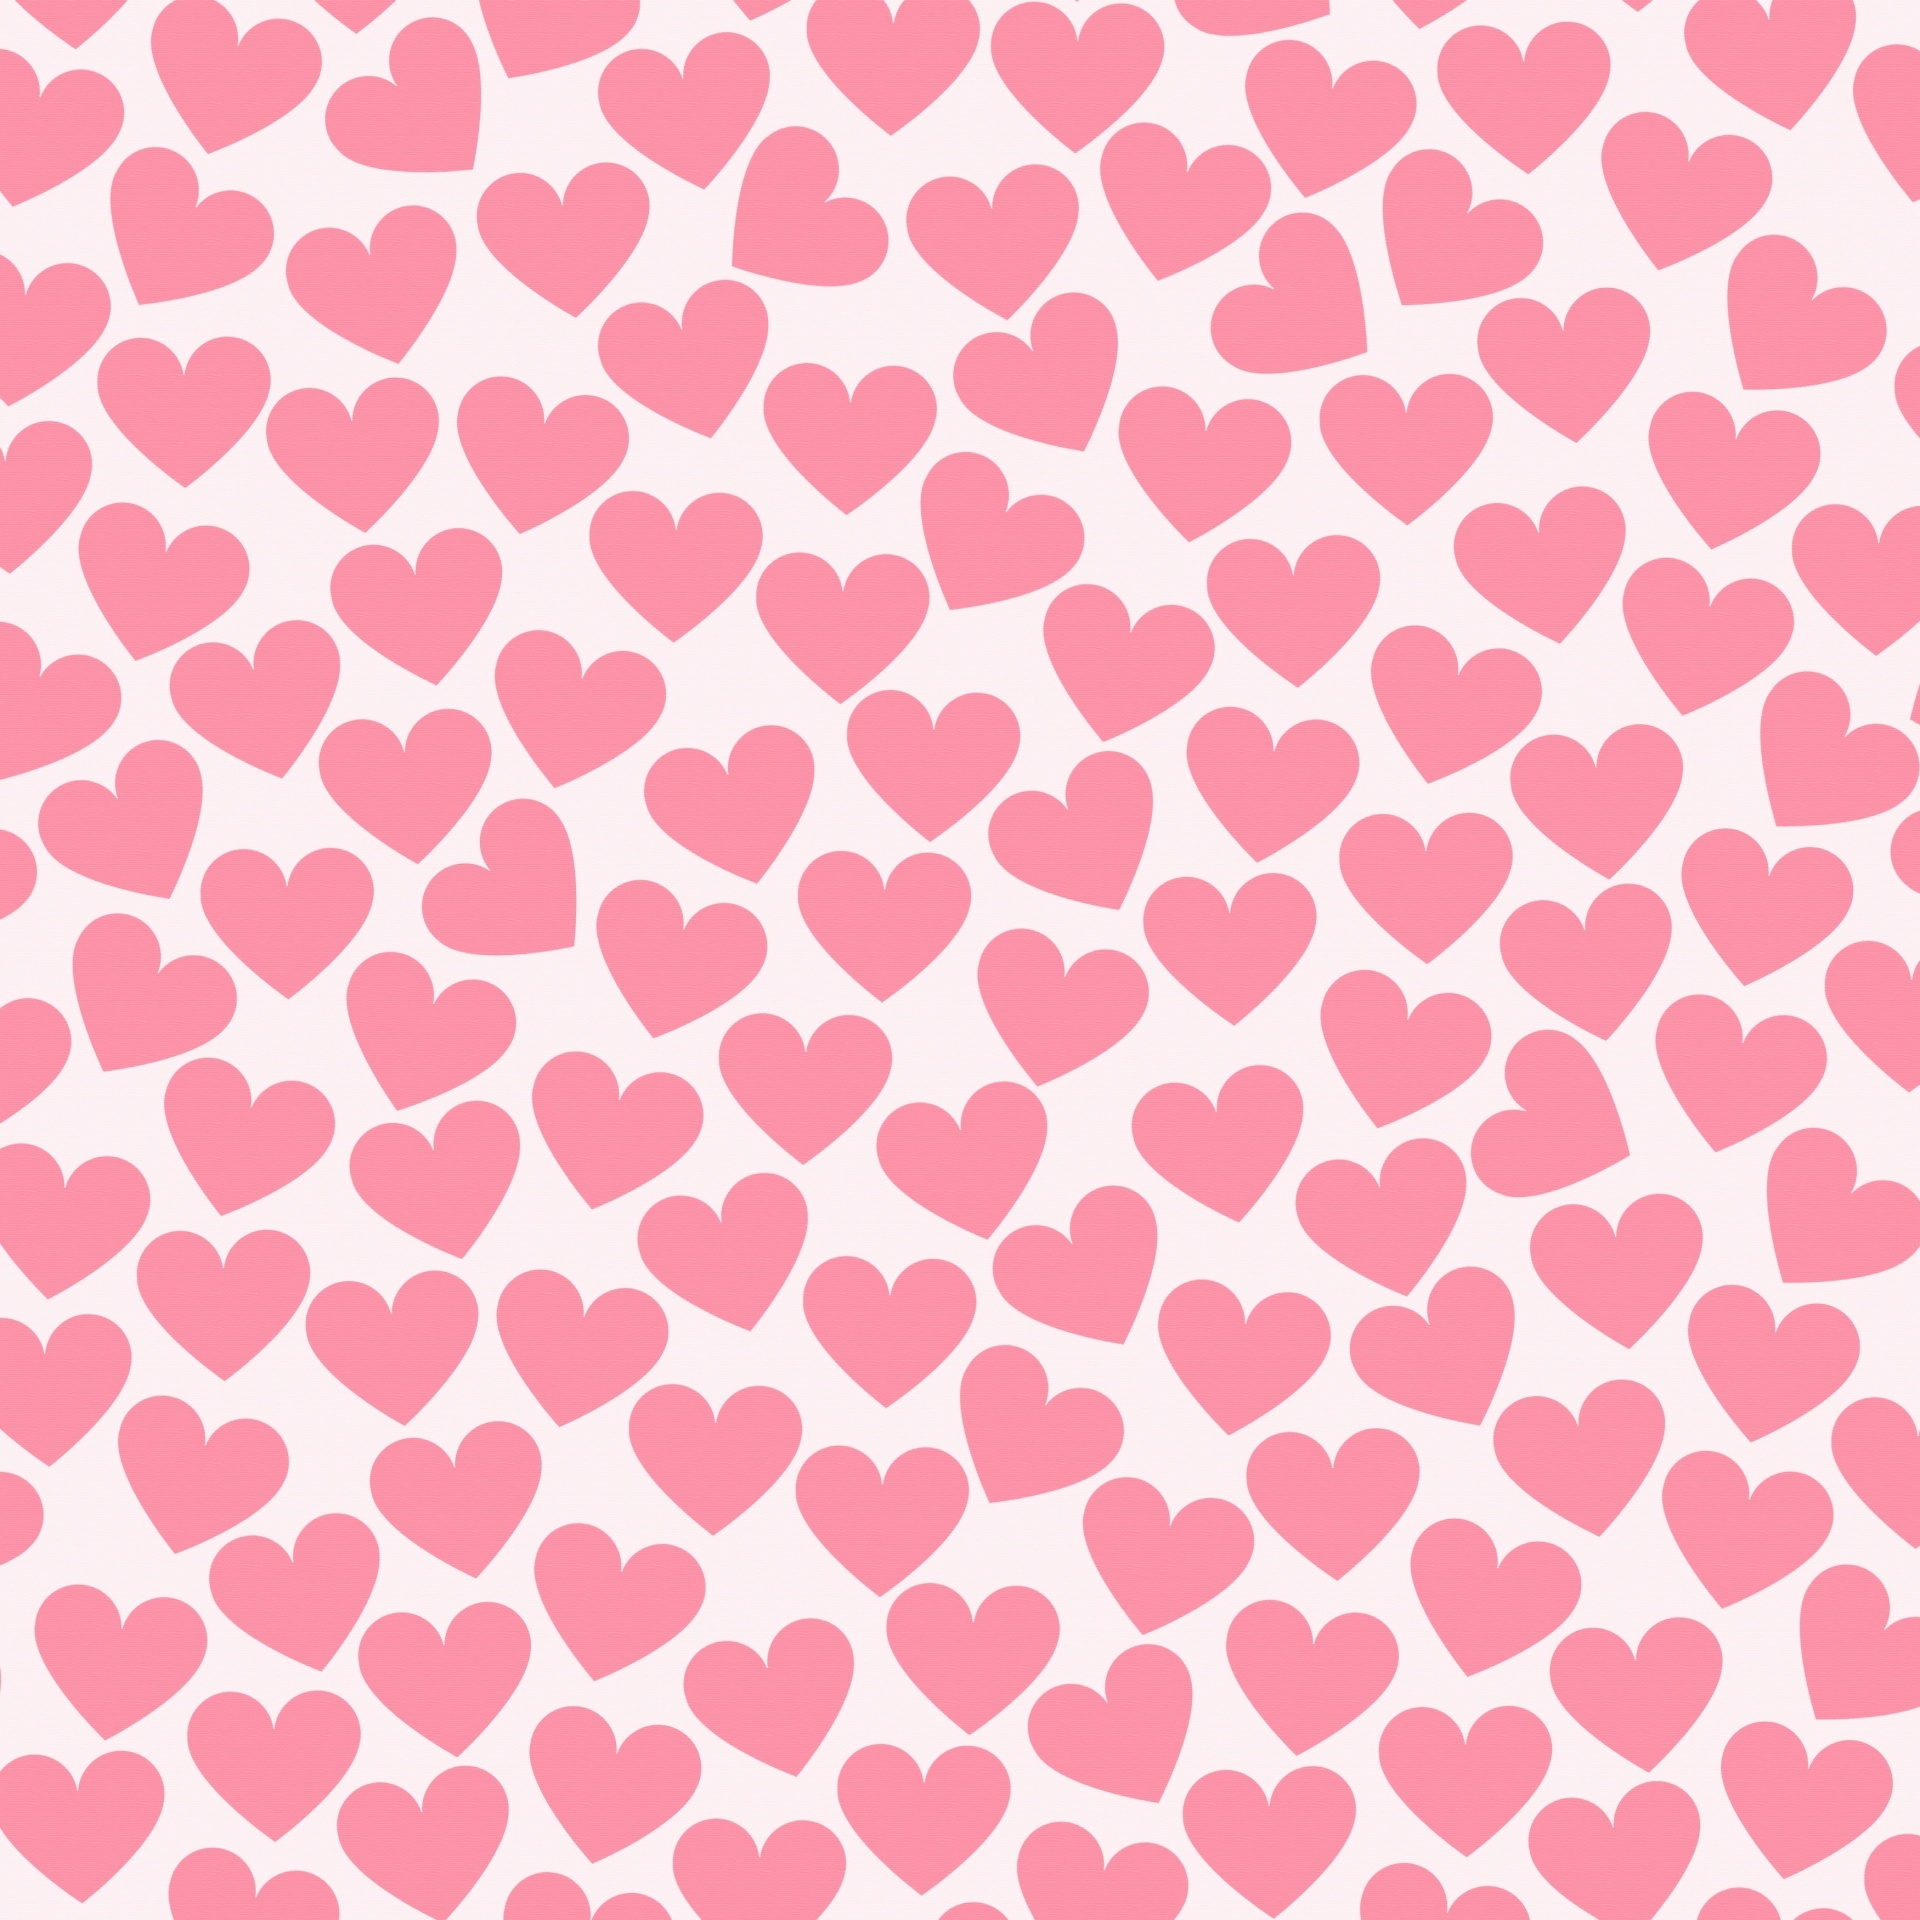 Hearts Pattern Background Pink